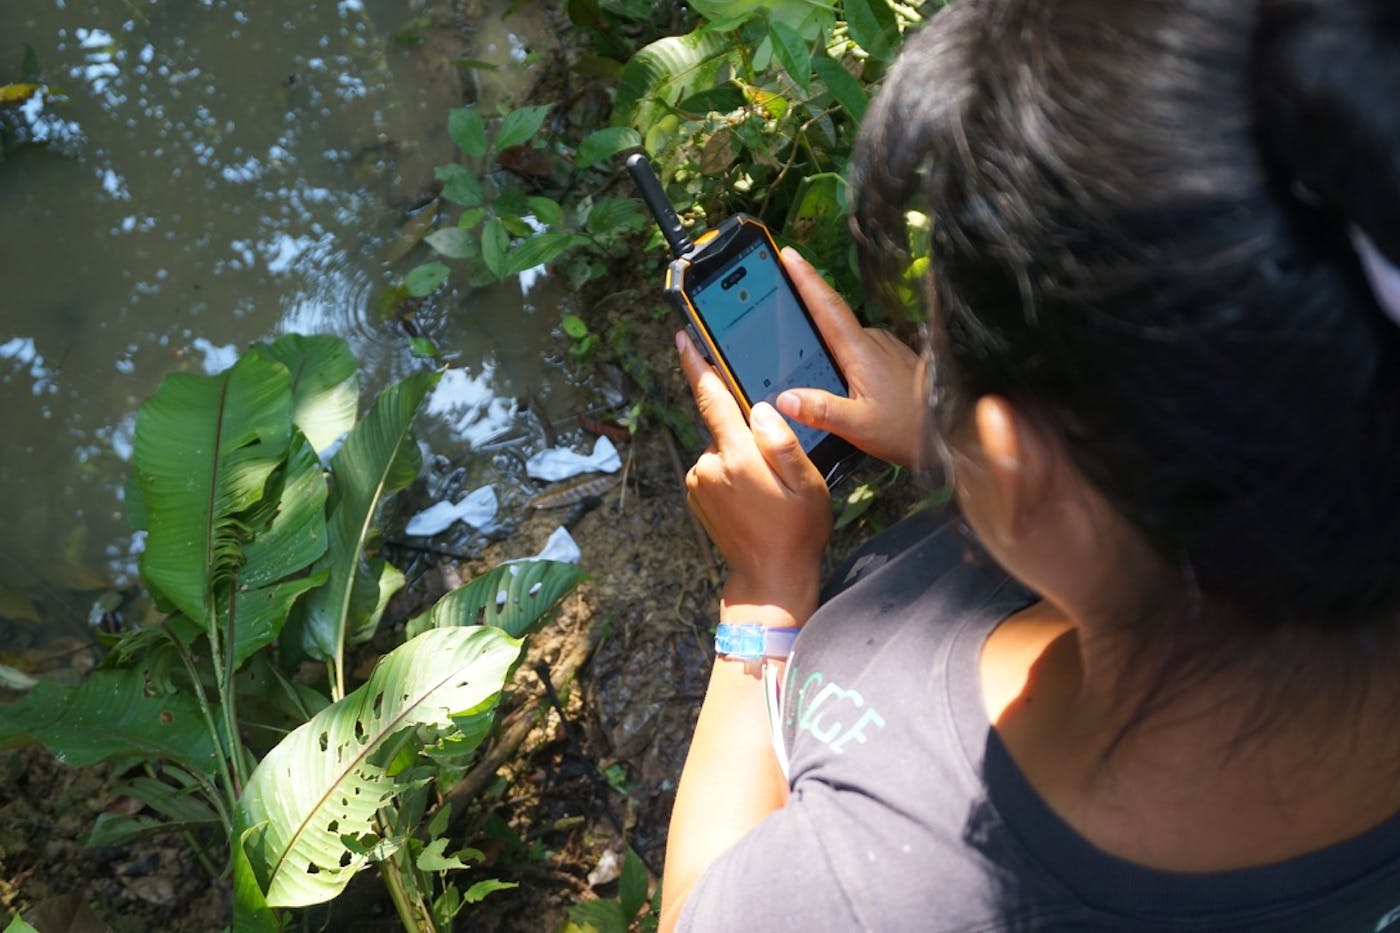 Strengthening Indigenous Territorial Management through Women-led Mapping Initiatives in Amazonia